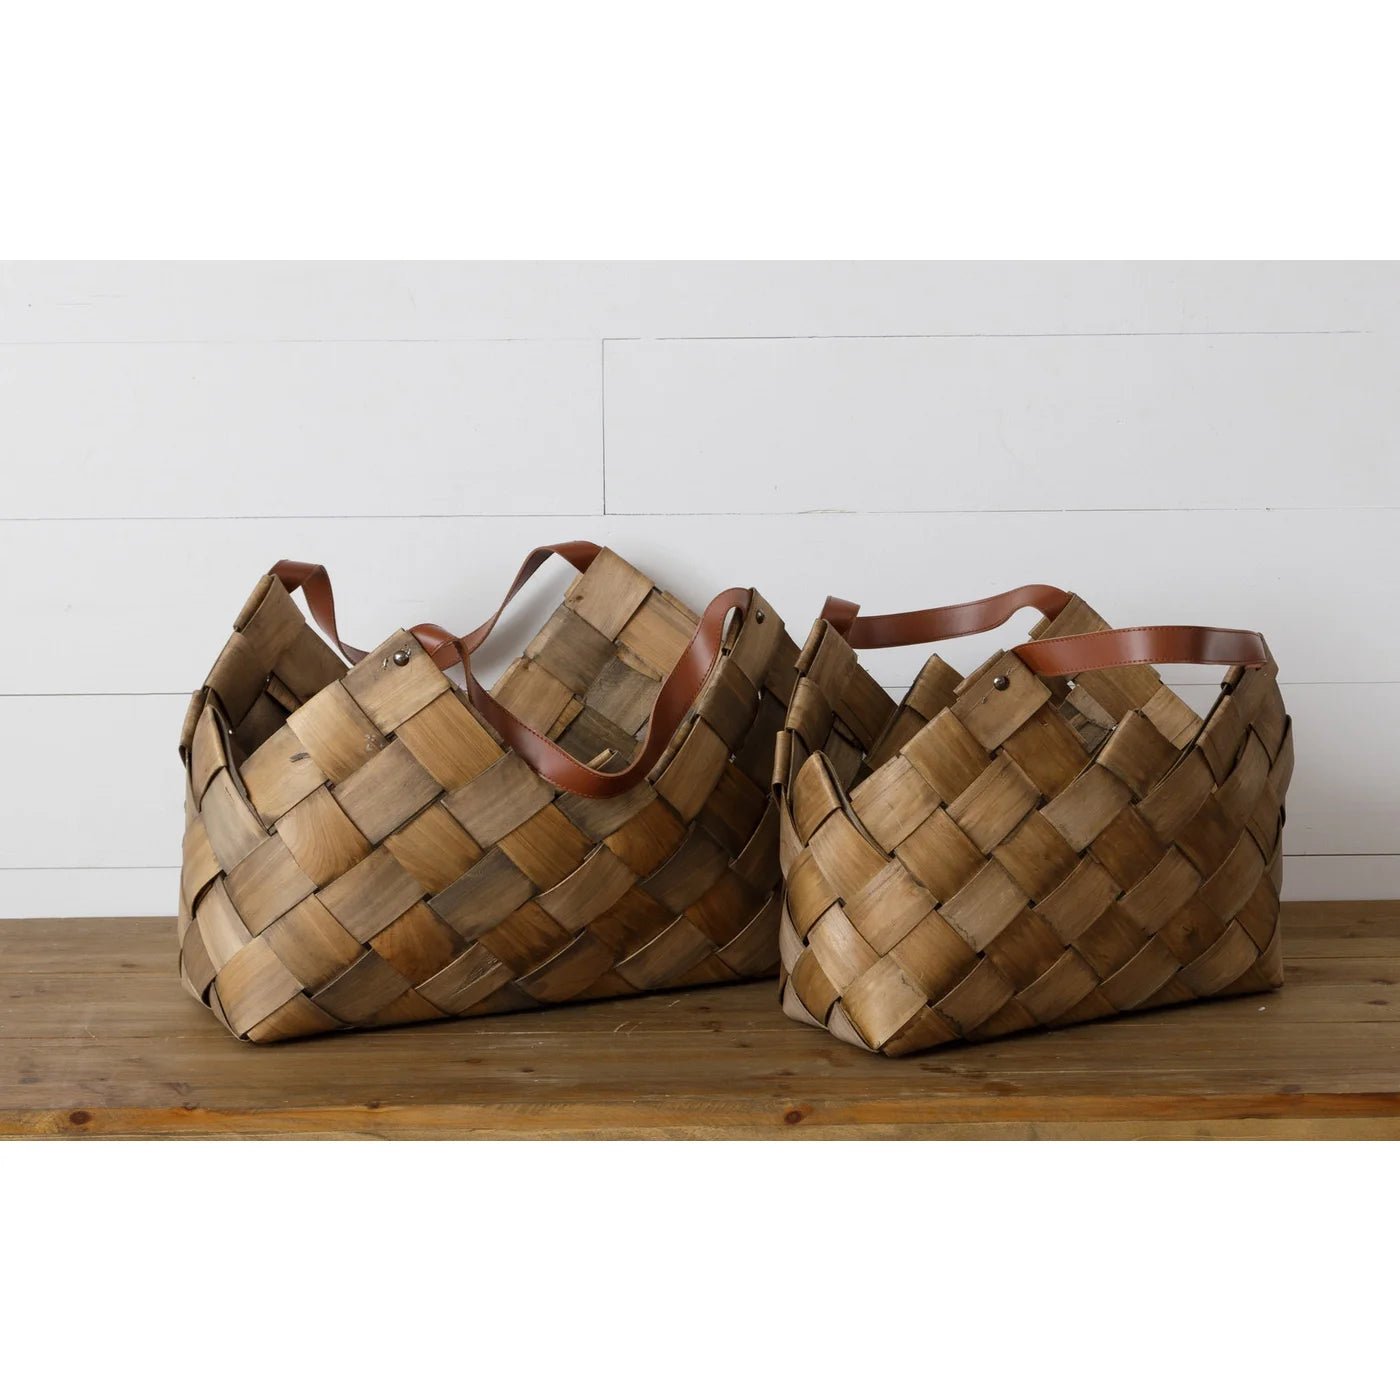 Chipwood Basket with Leather Handles - The Brass Bee